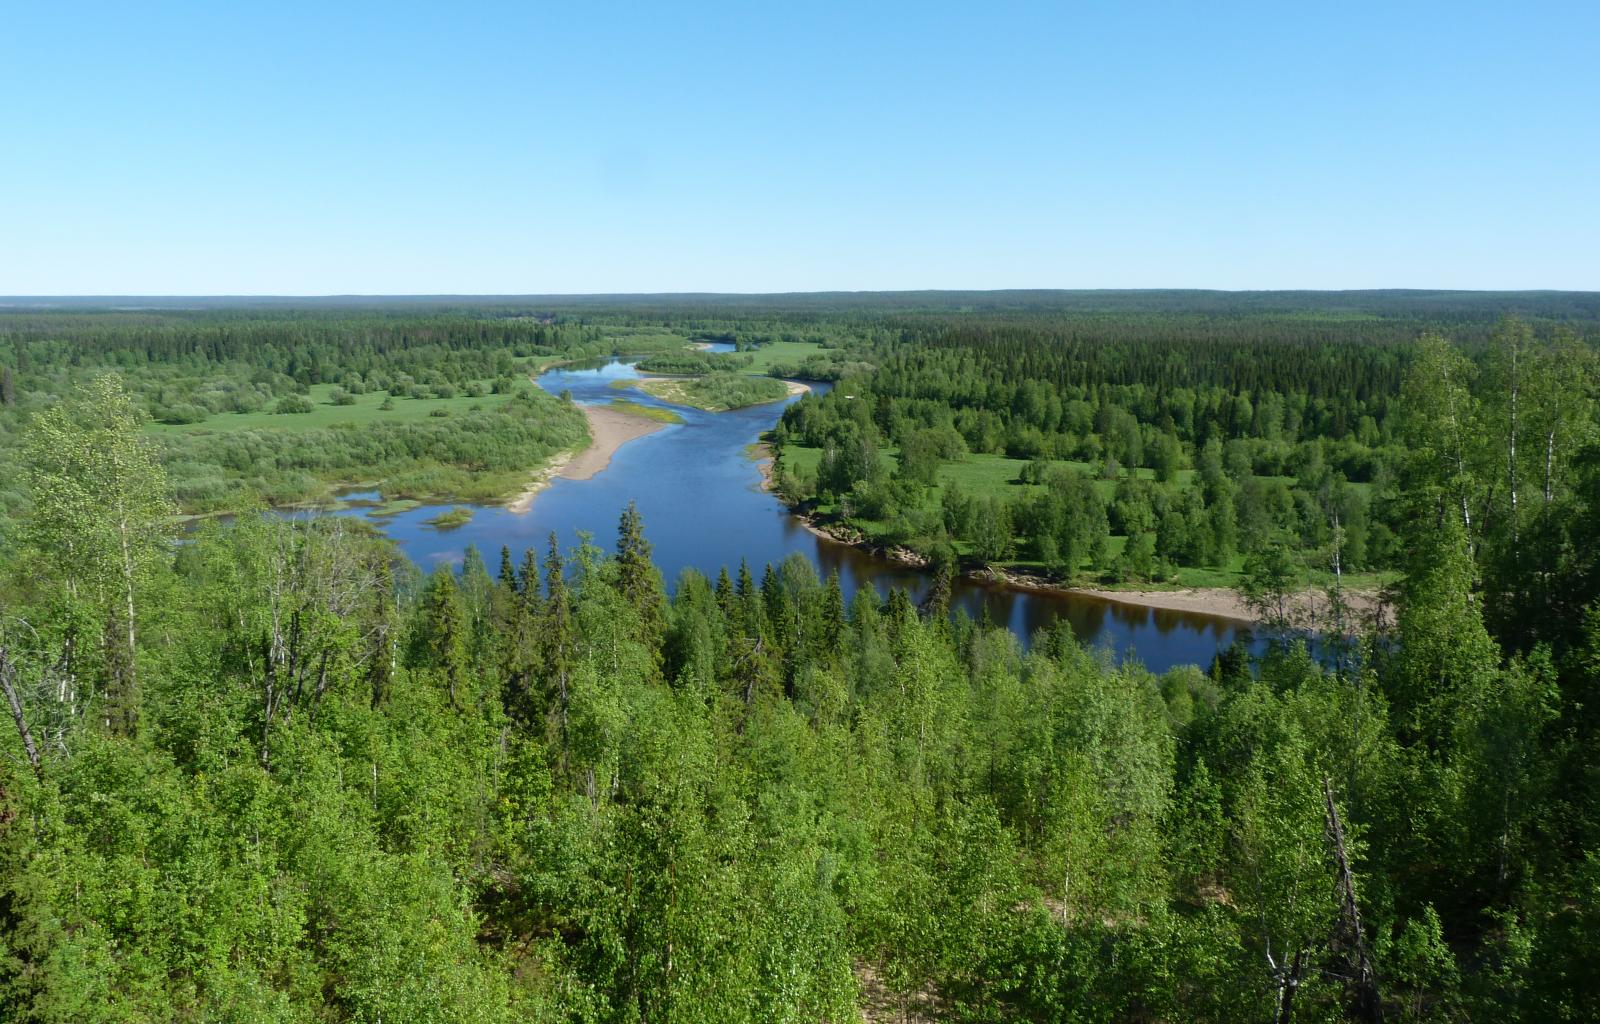 Old-growth forests protected in Finland